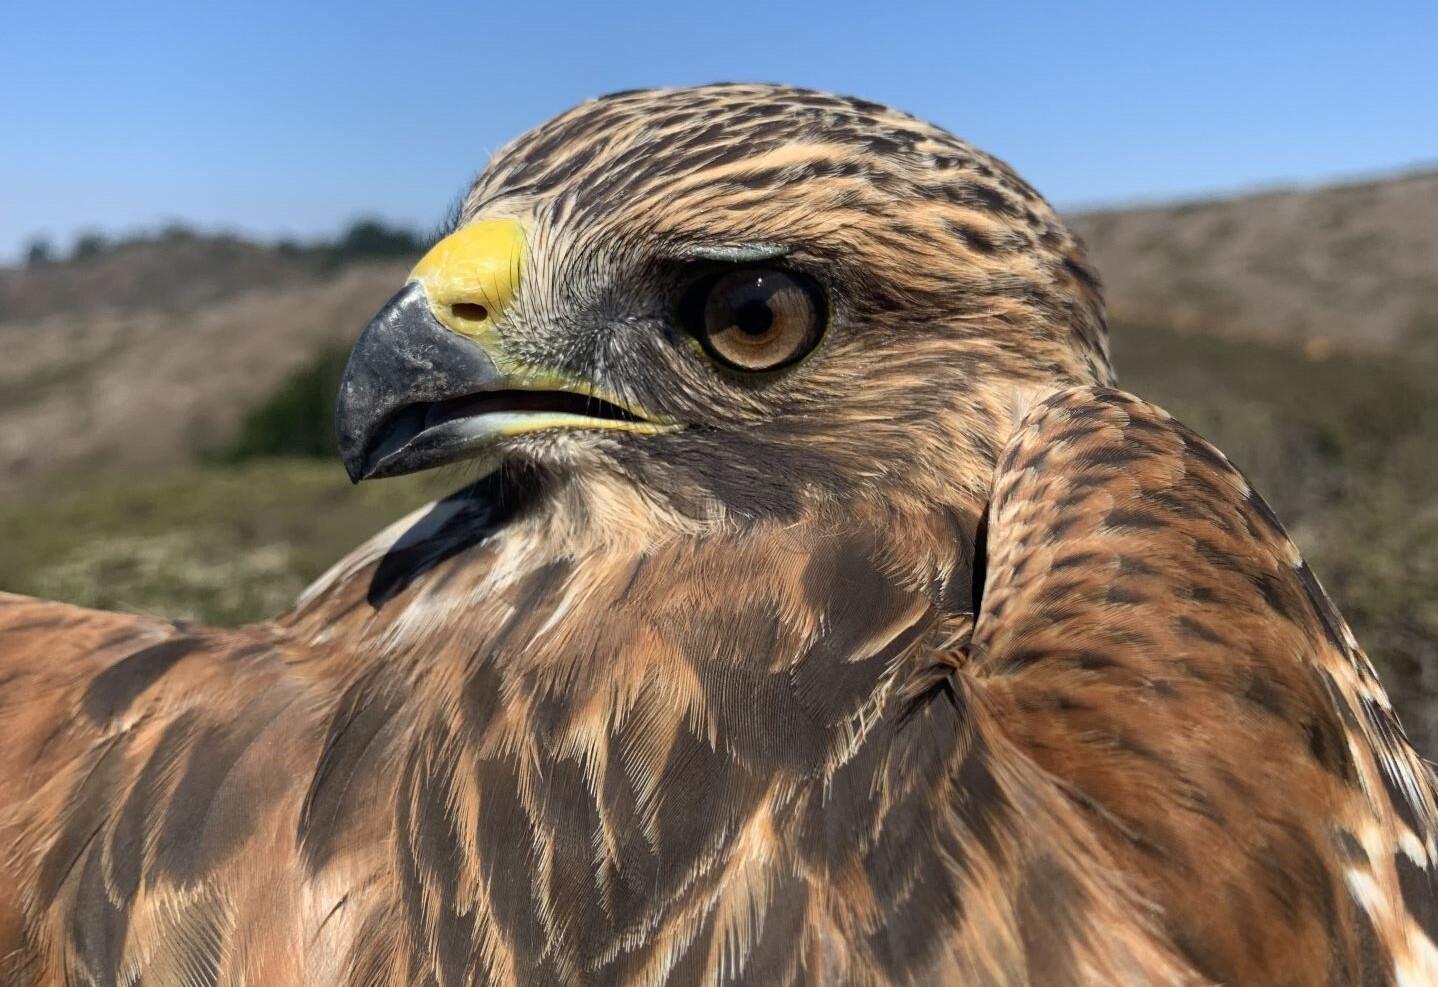 A Red-shouldered Hawk with brown and reddish-brown feathers looking over its shoulder, against a blue sky.